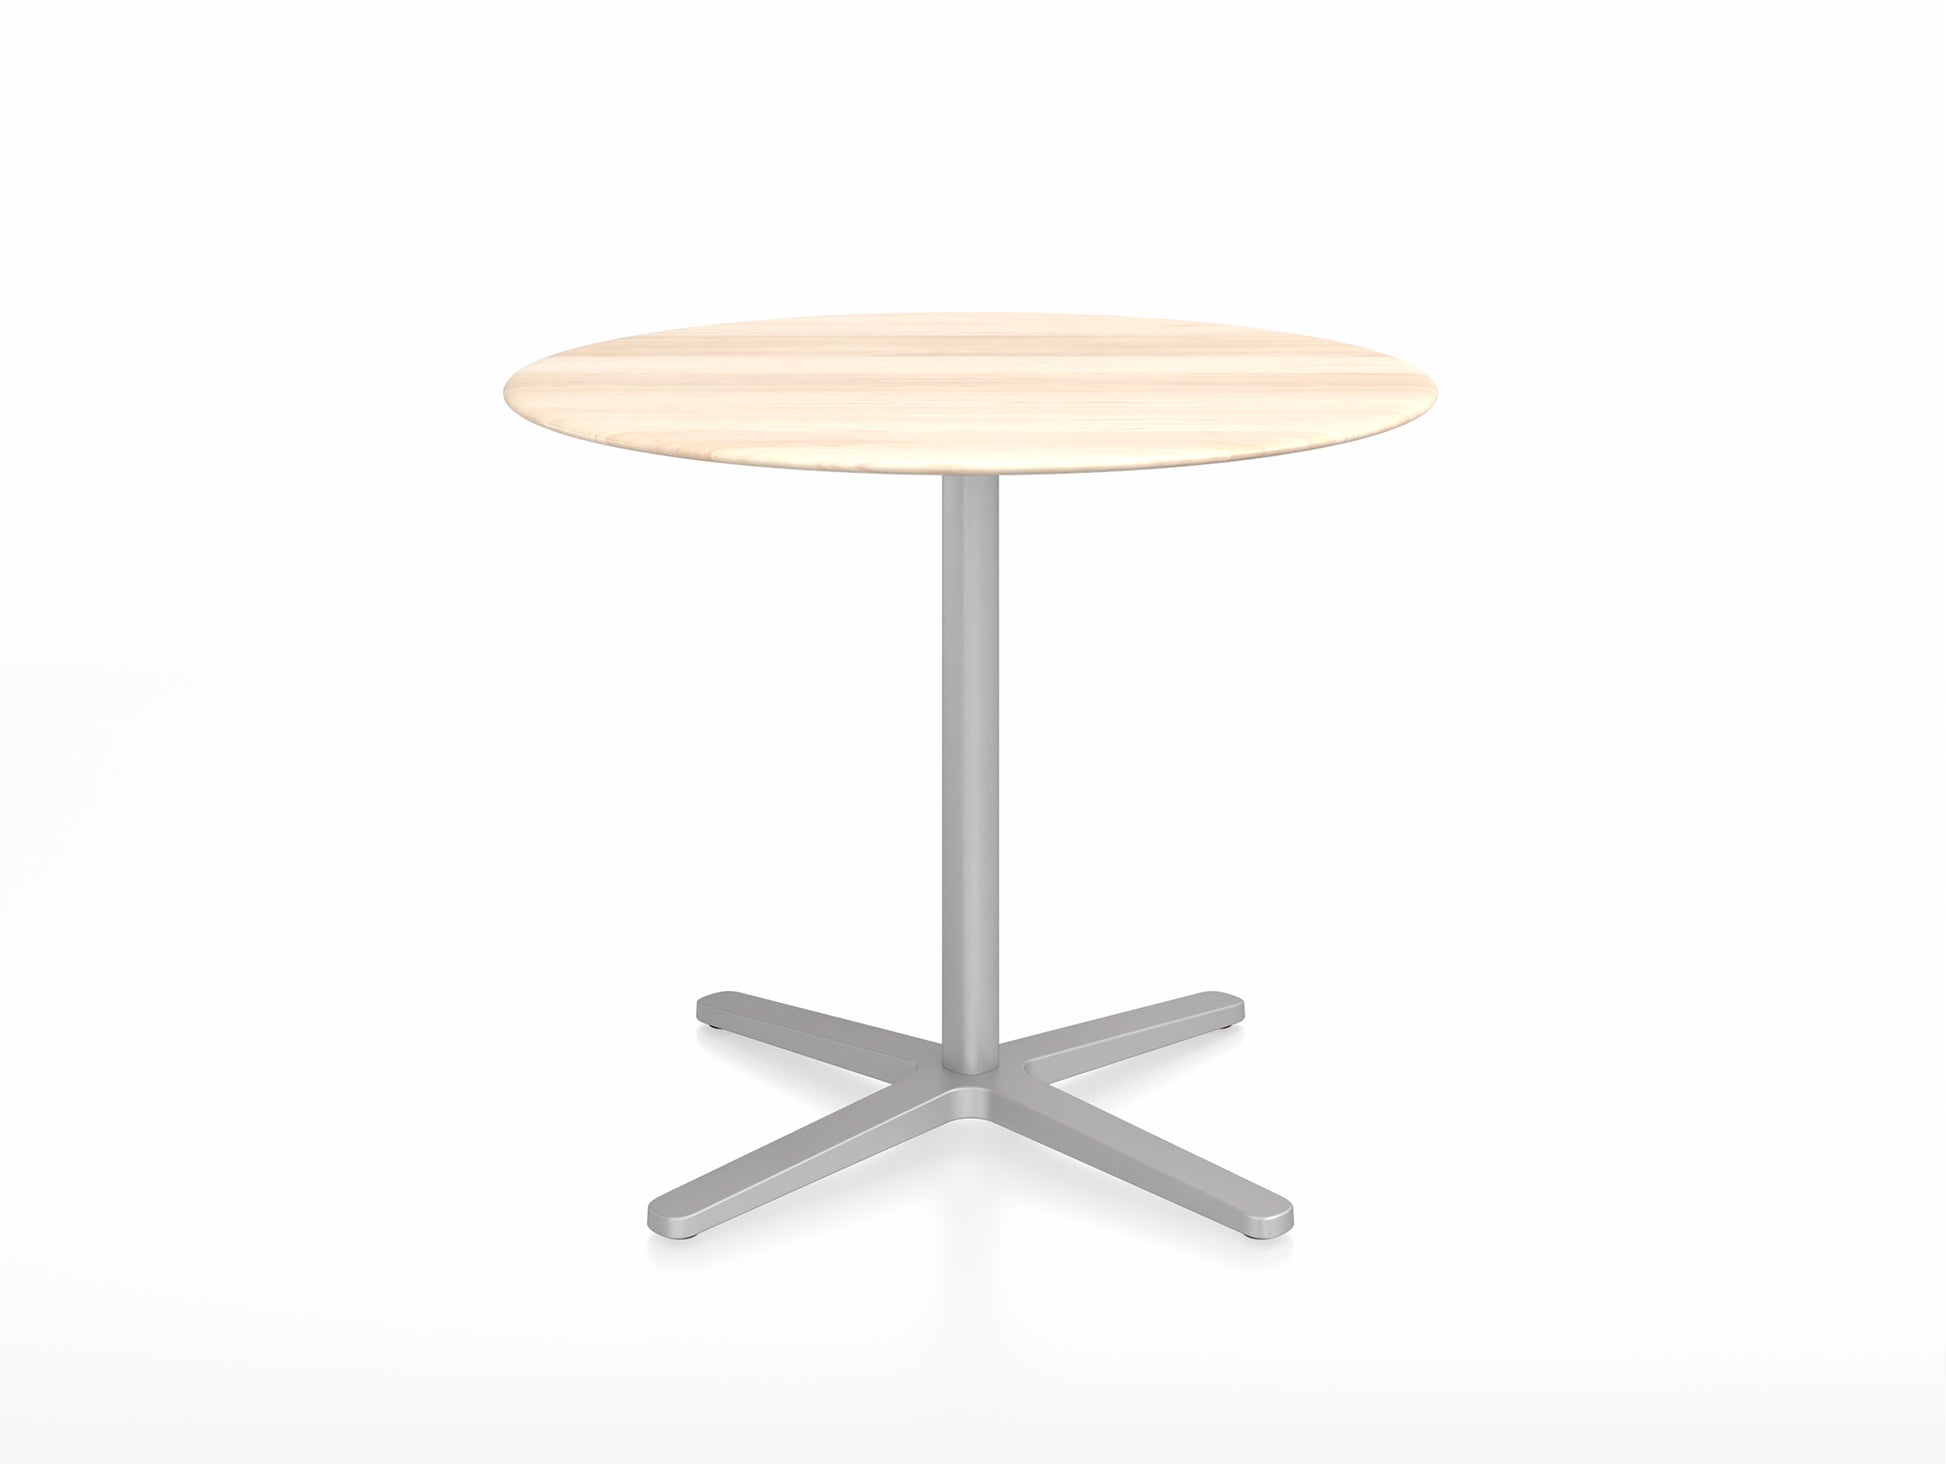 2 Inch Outdoor Cafe Table - X Base by Emeco - Accoya Wood Top / Aluminium Base / Diameter 91